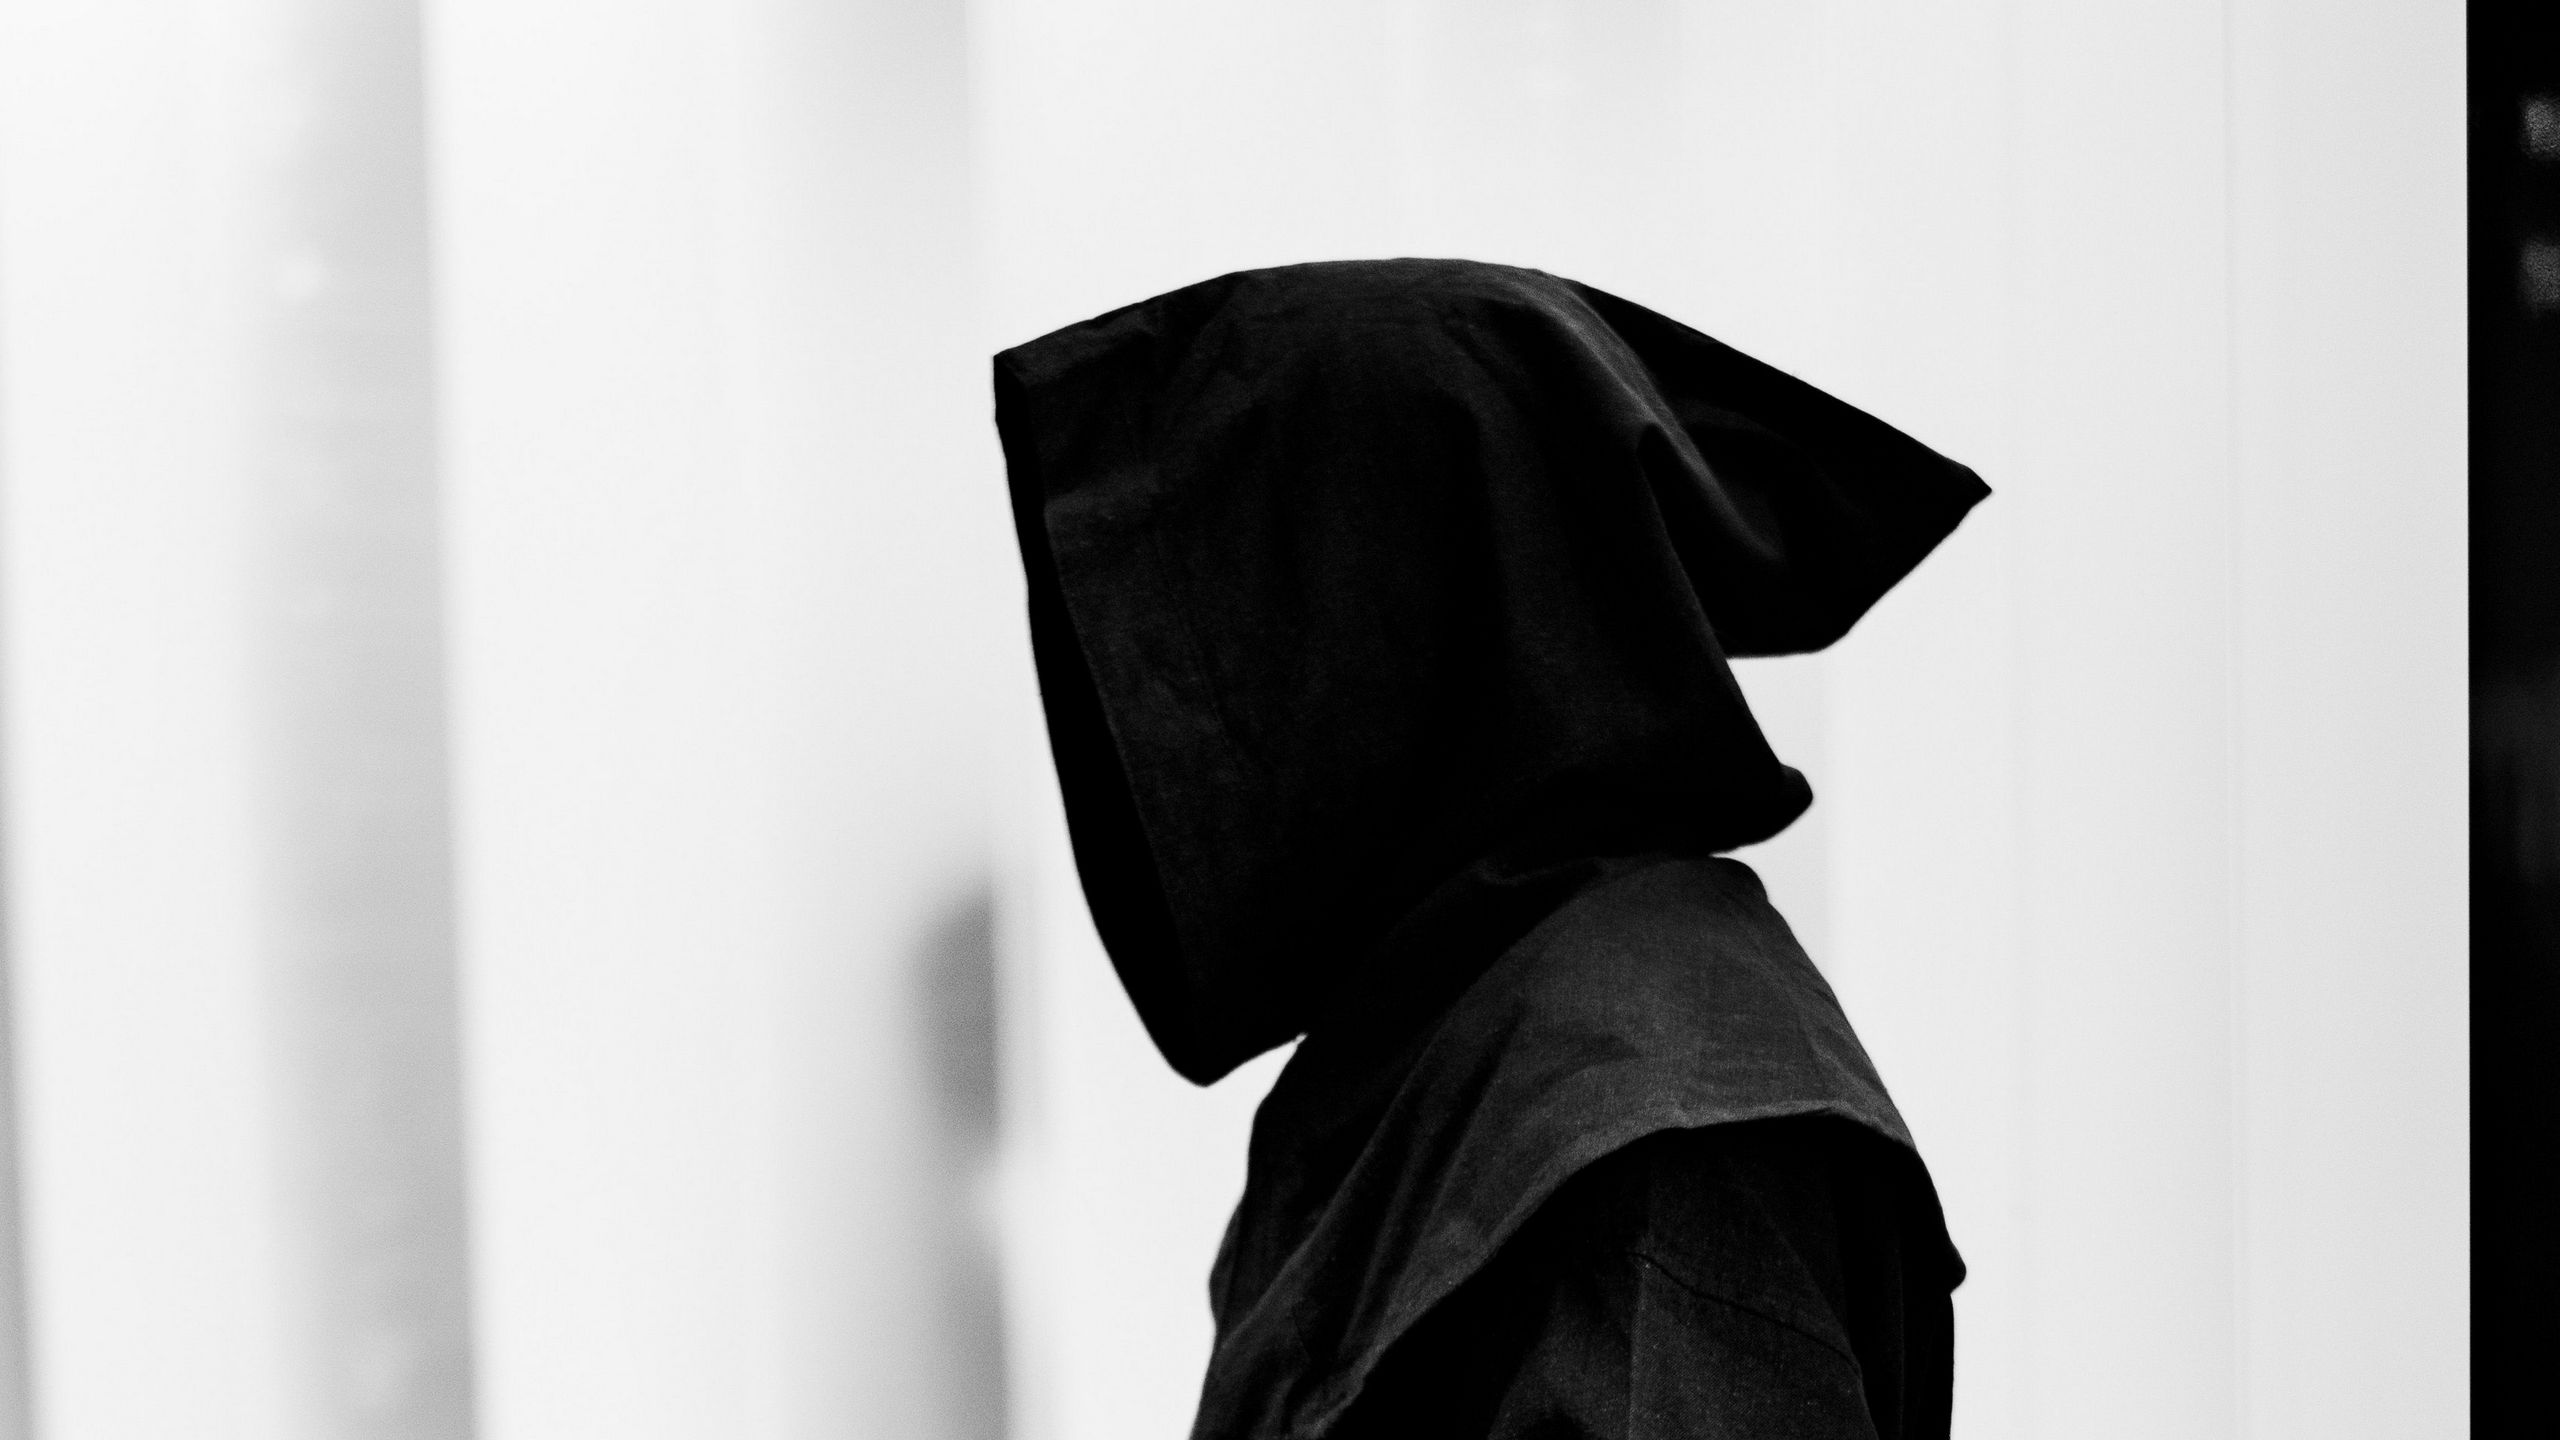 Download wallpaper 2560x1440 silhouette, hood, fabric, black and white ...